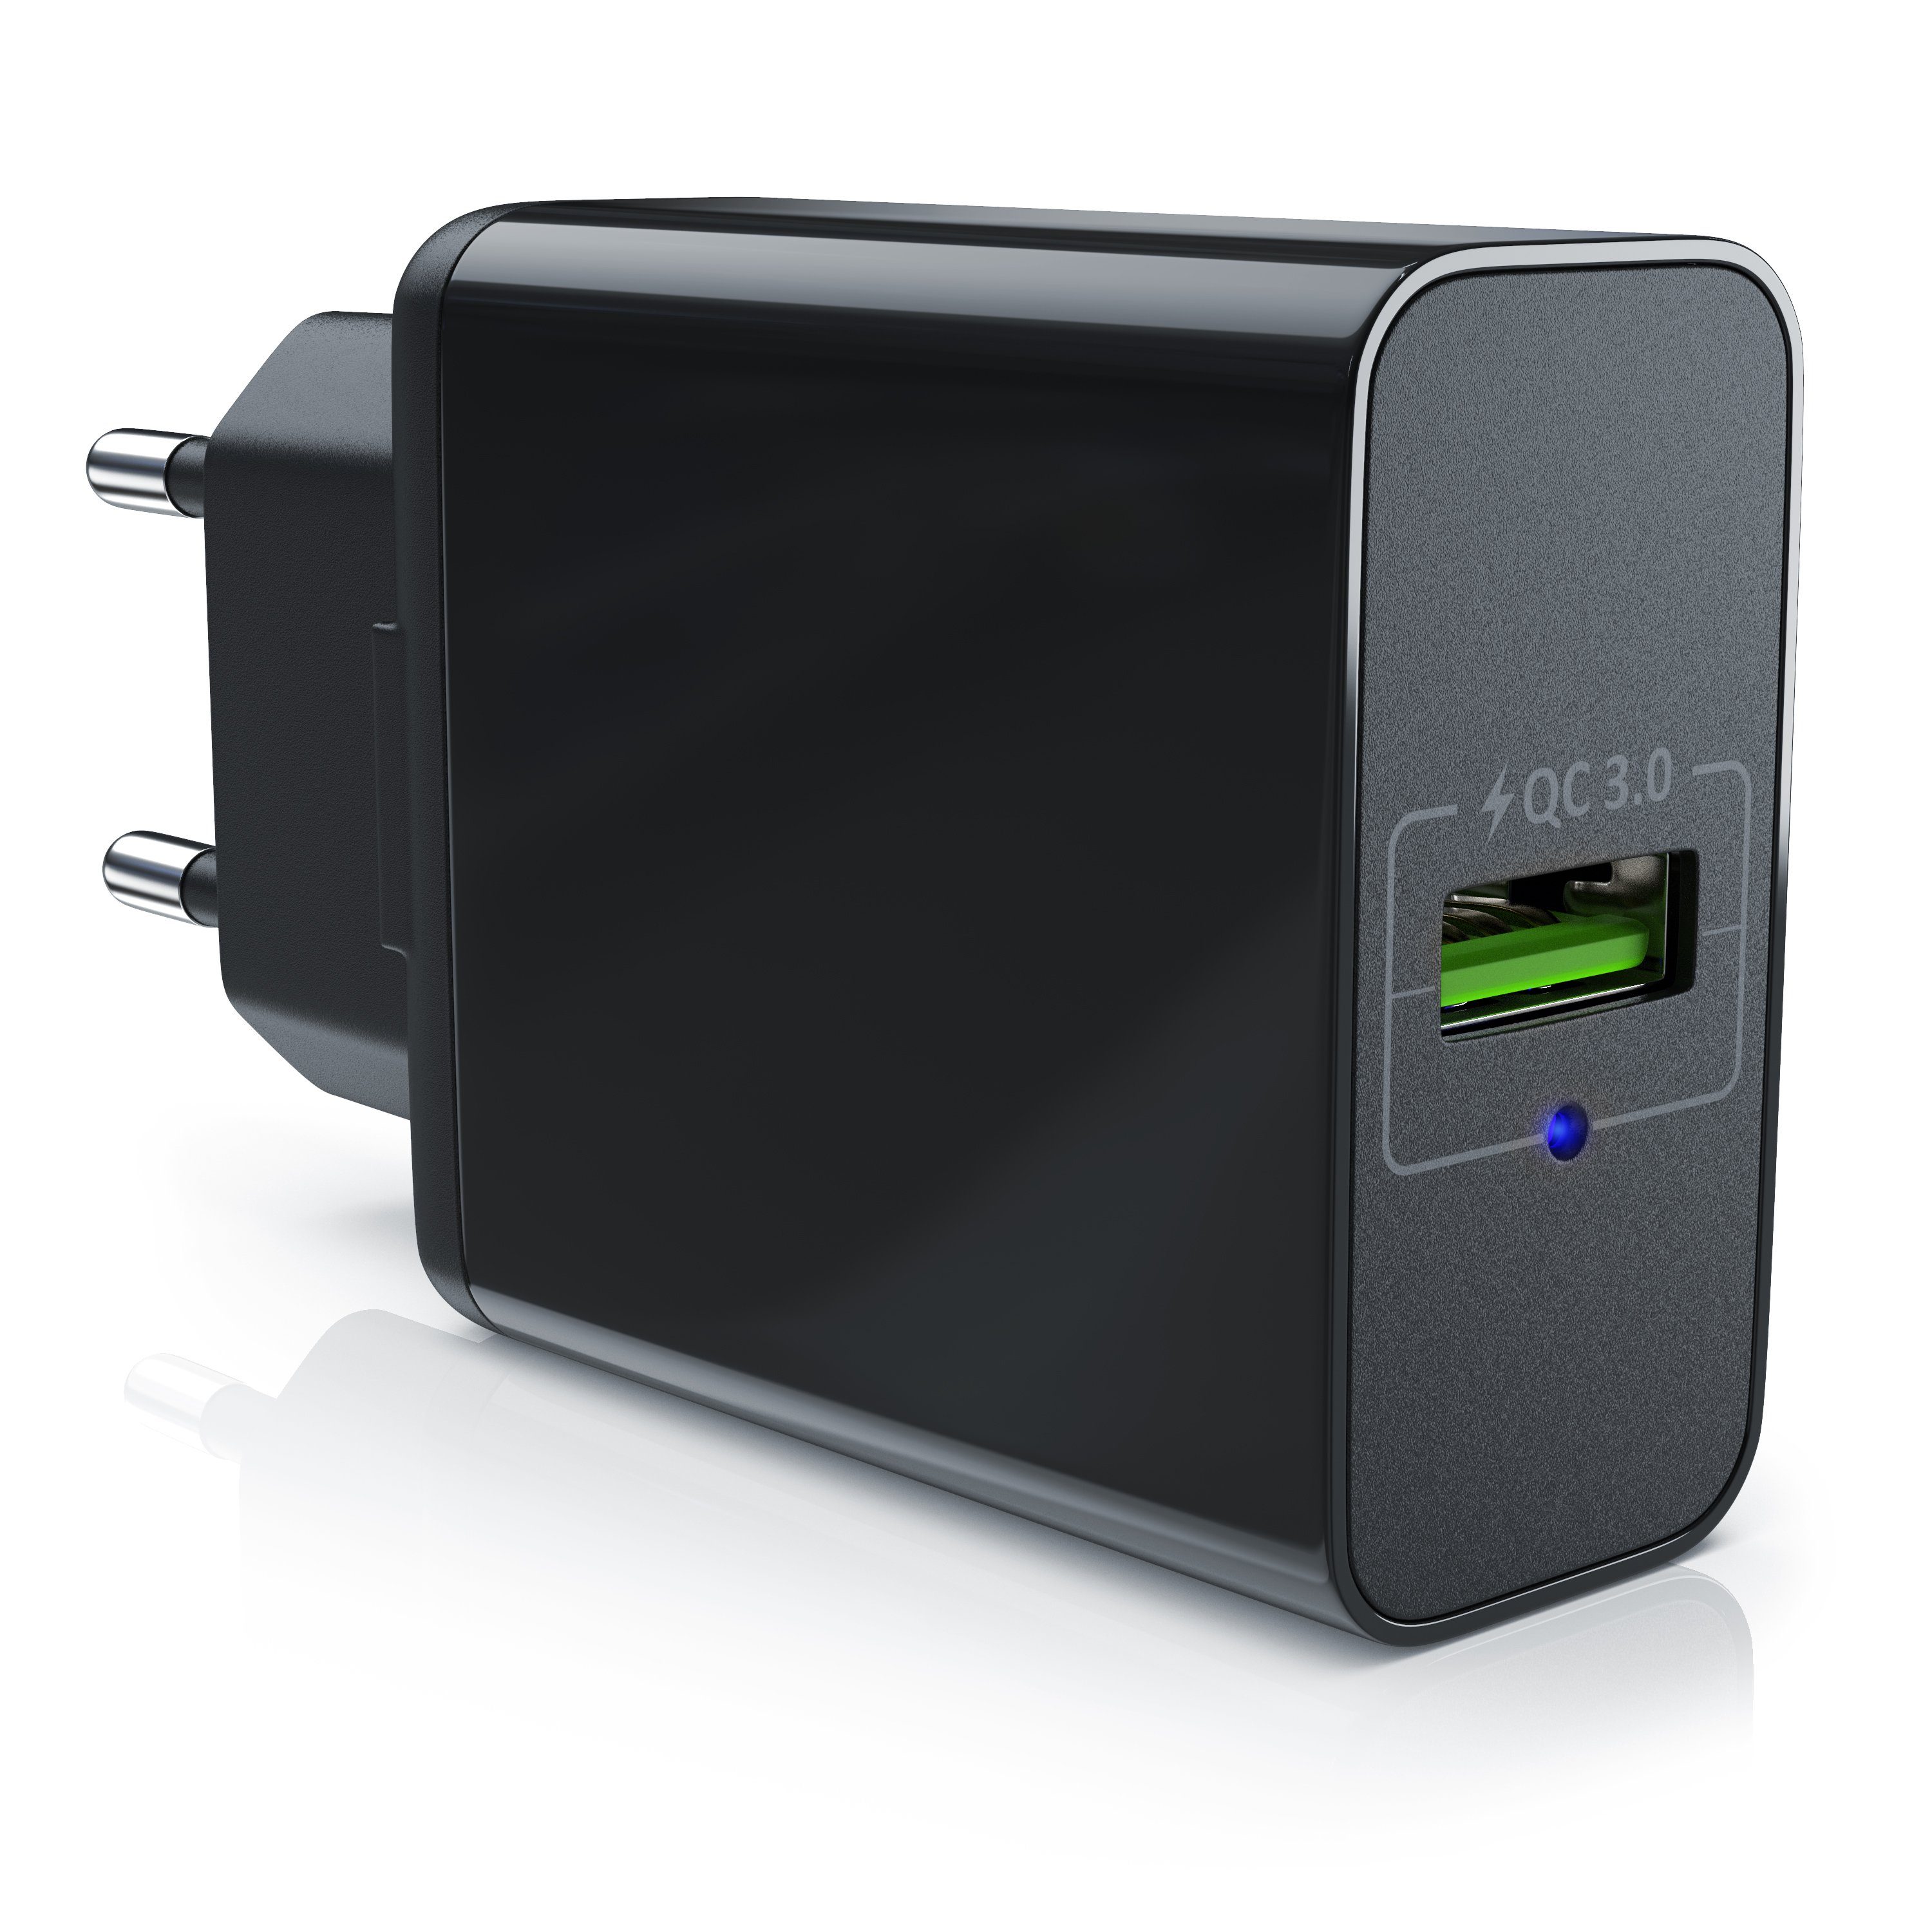 Aplic USB-Ladegerät (3000 mA, Netzteil mit Schnellladefunktion, Quick  Charge 3.0, Smart Charge)